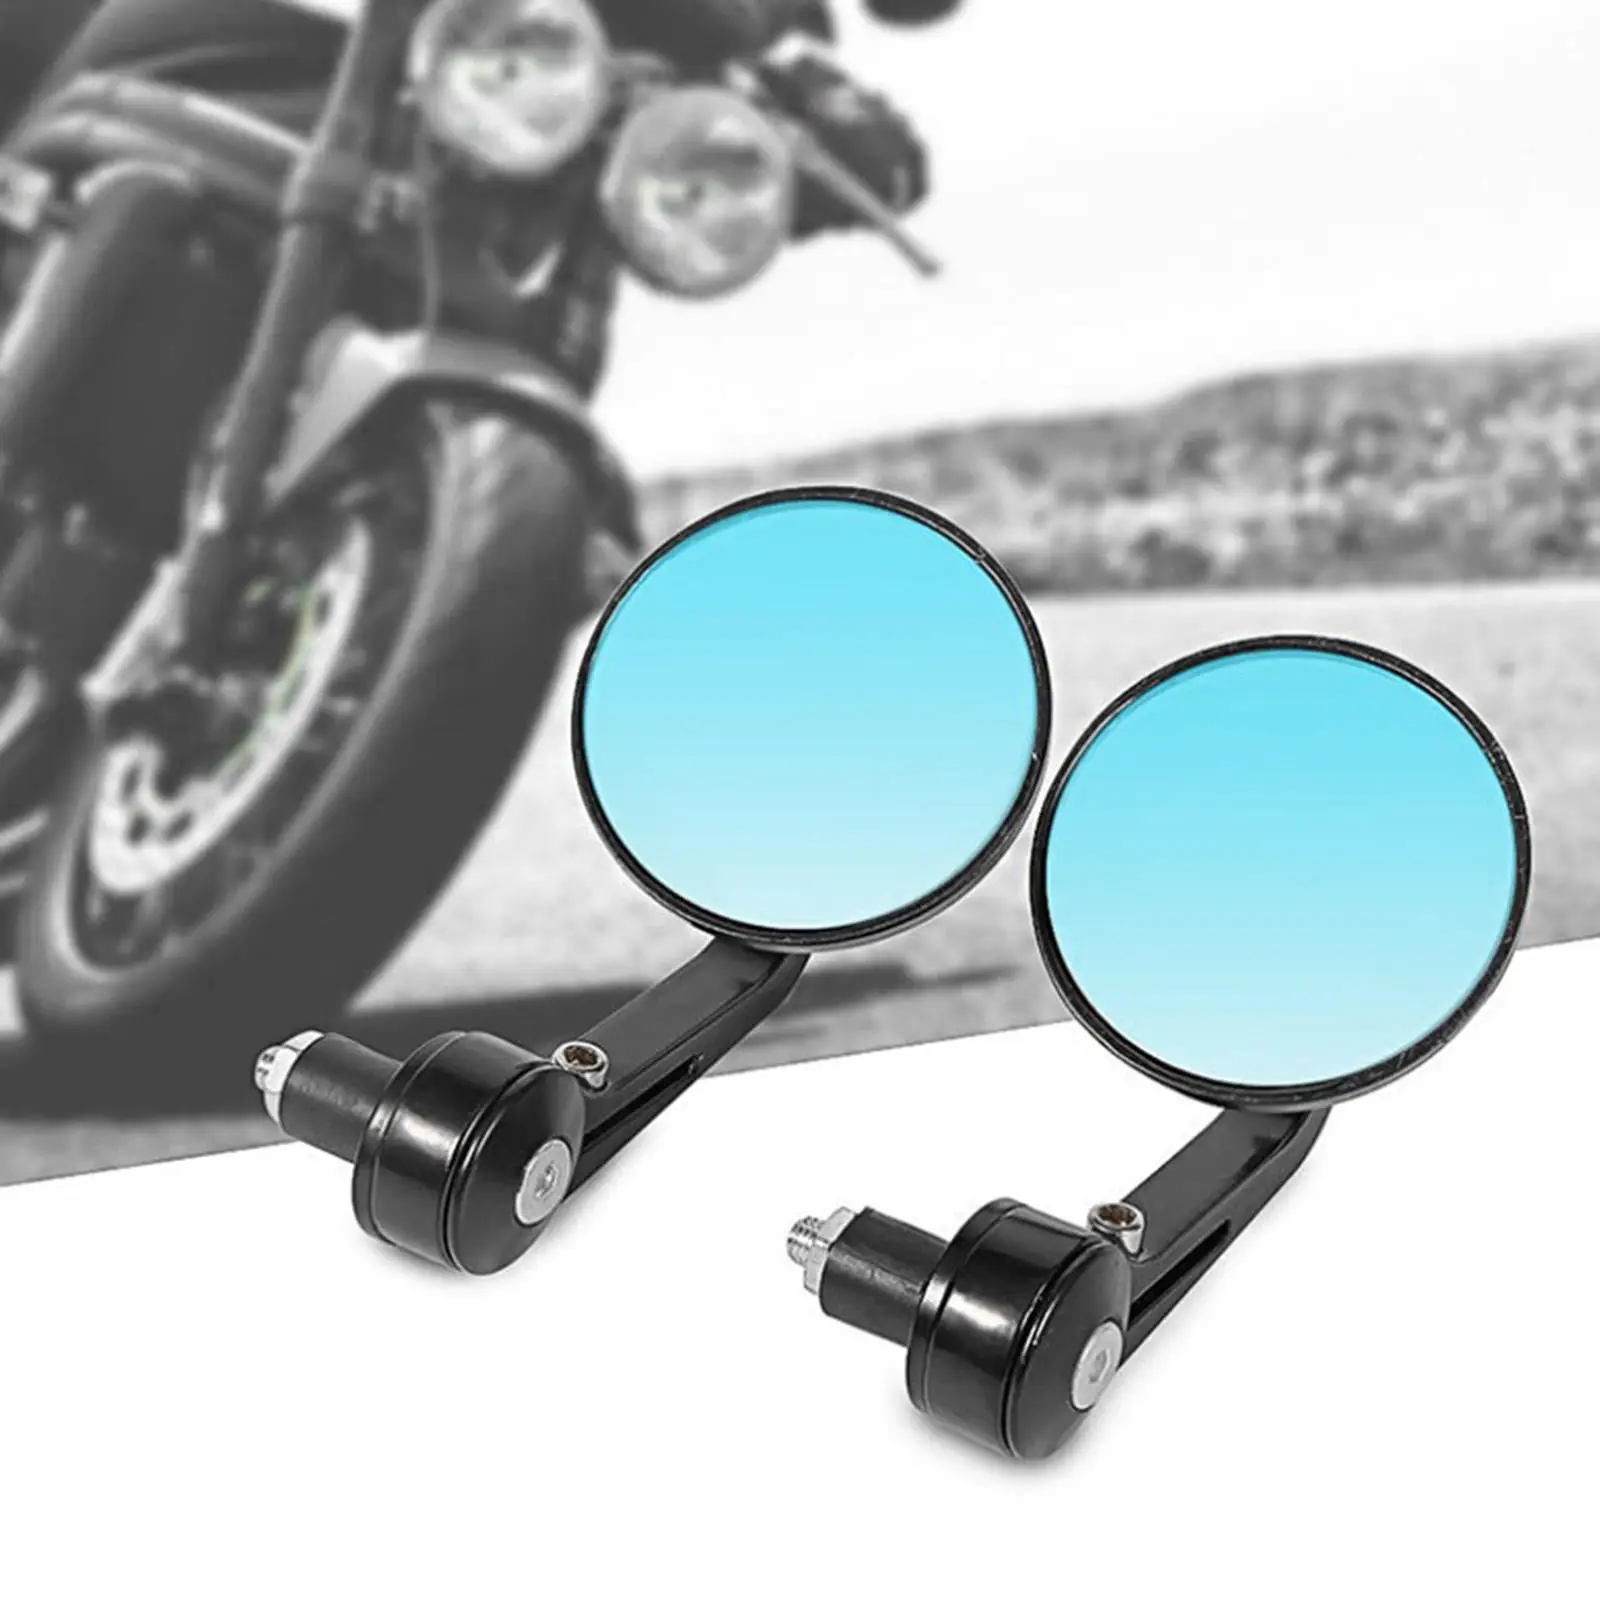 1 Pair Motorcycle Rear View Mirrors Aluminum Alloy Universal fits for Most Motocycle